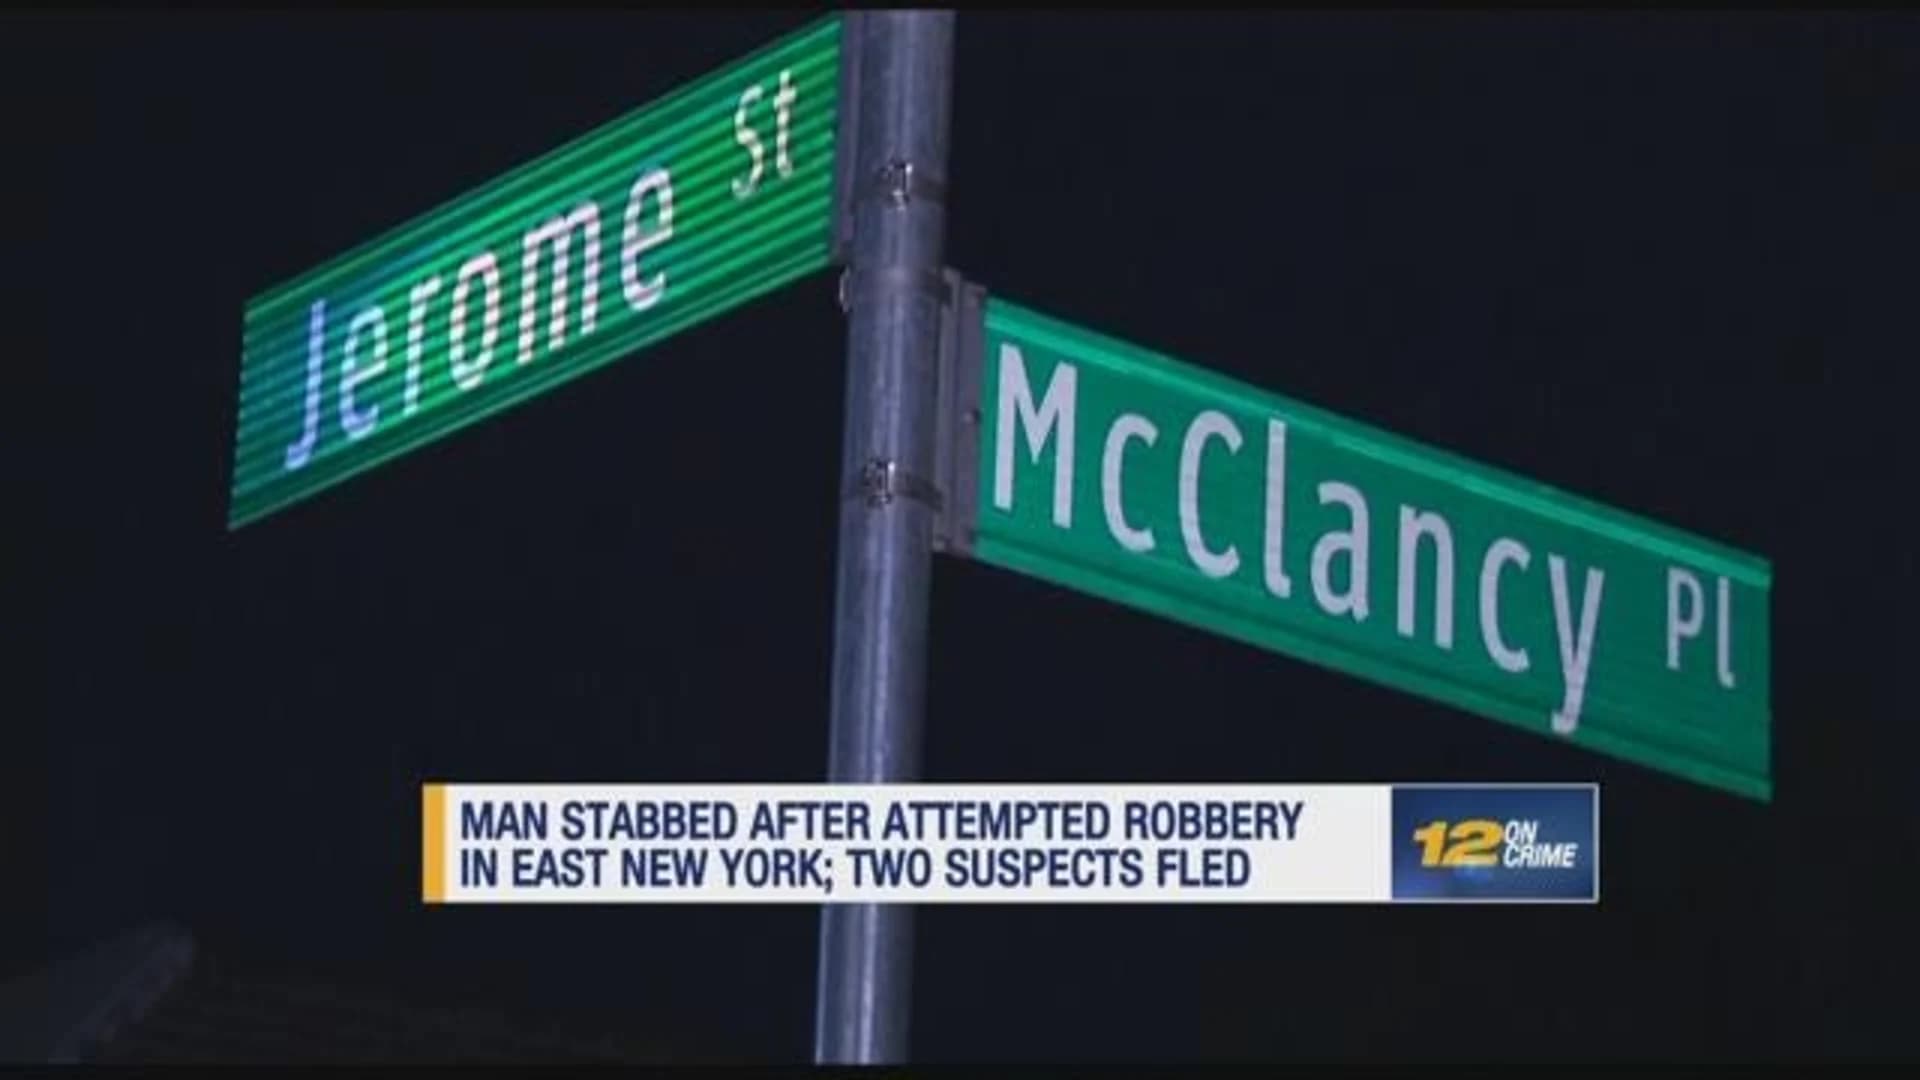 Man stabbed during attempted robbery in East New York